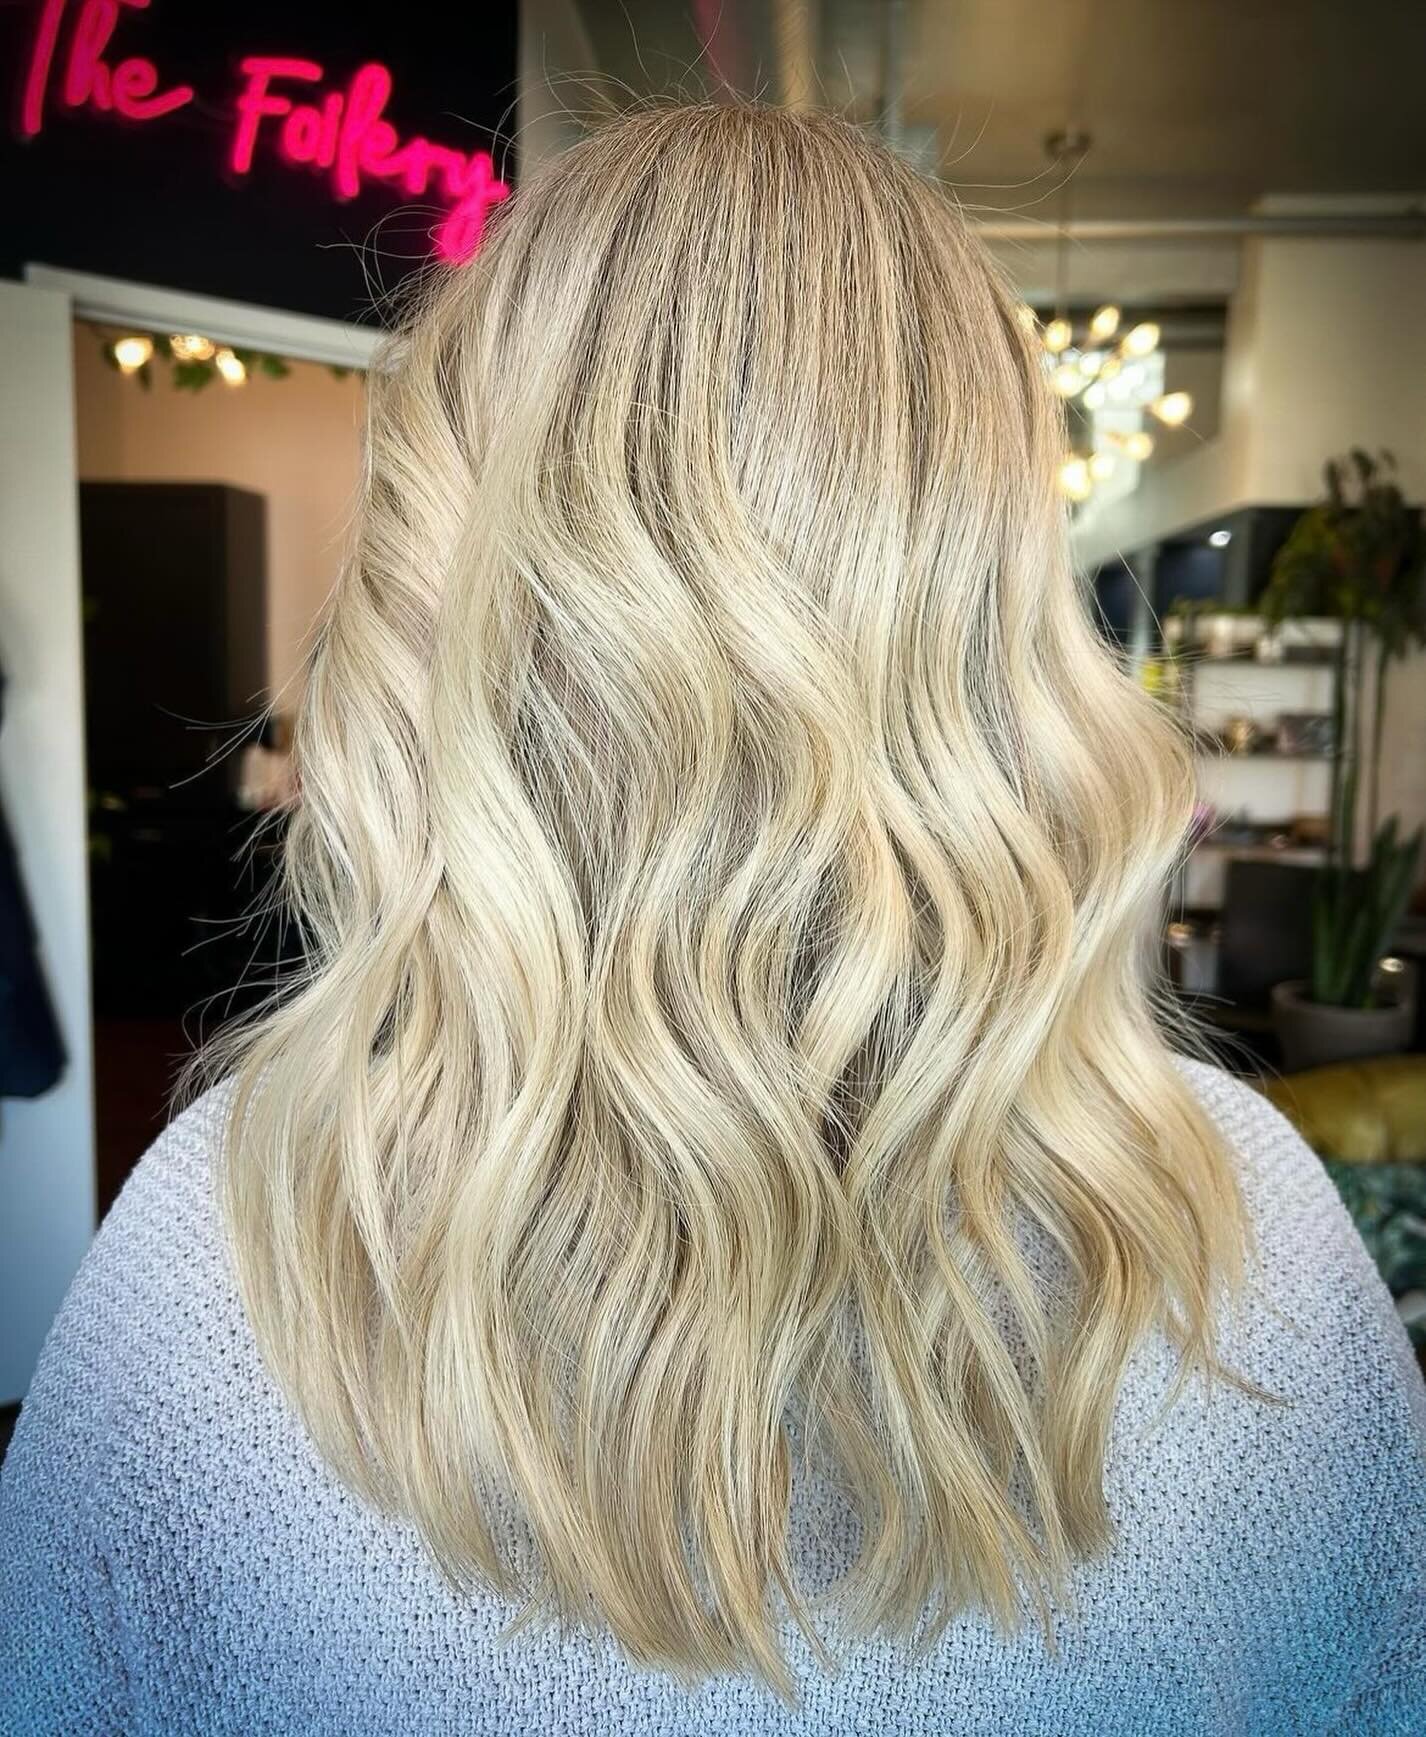 ✨Ready for summer!  This beauty was created by Danielle @_hairby.danielle